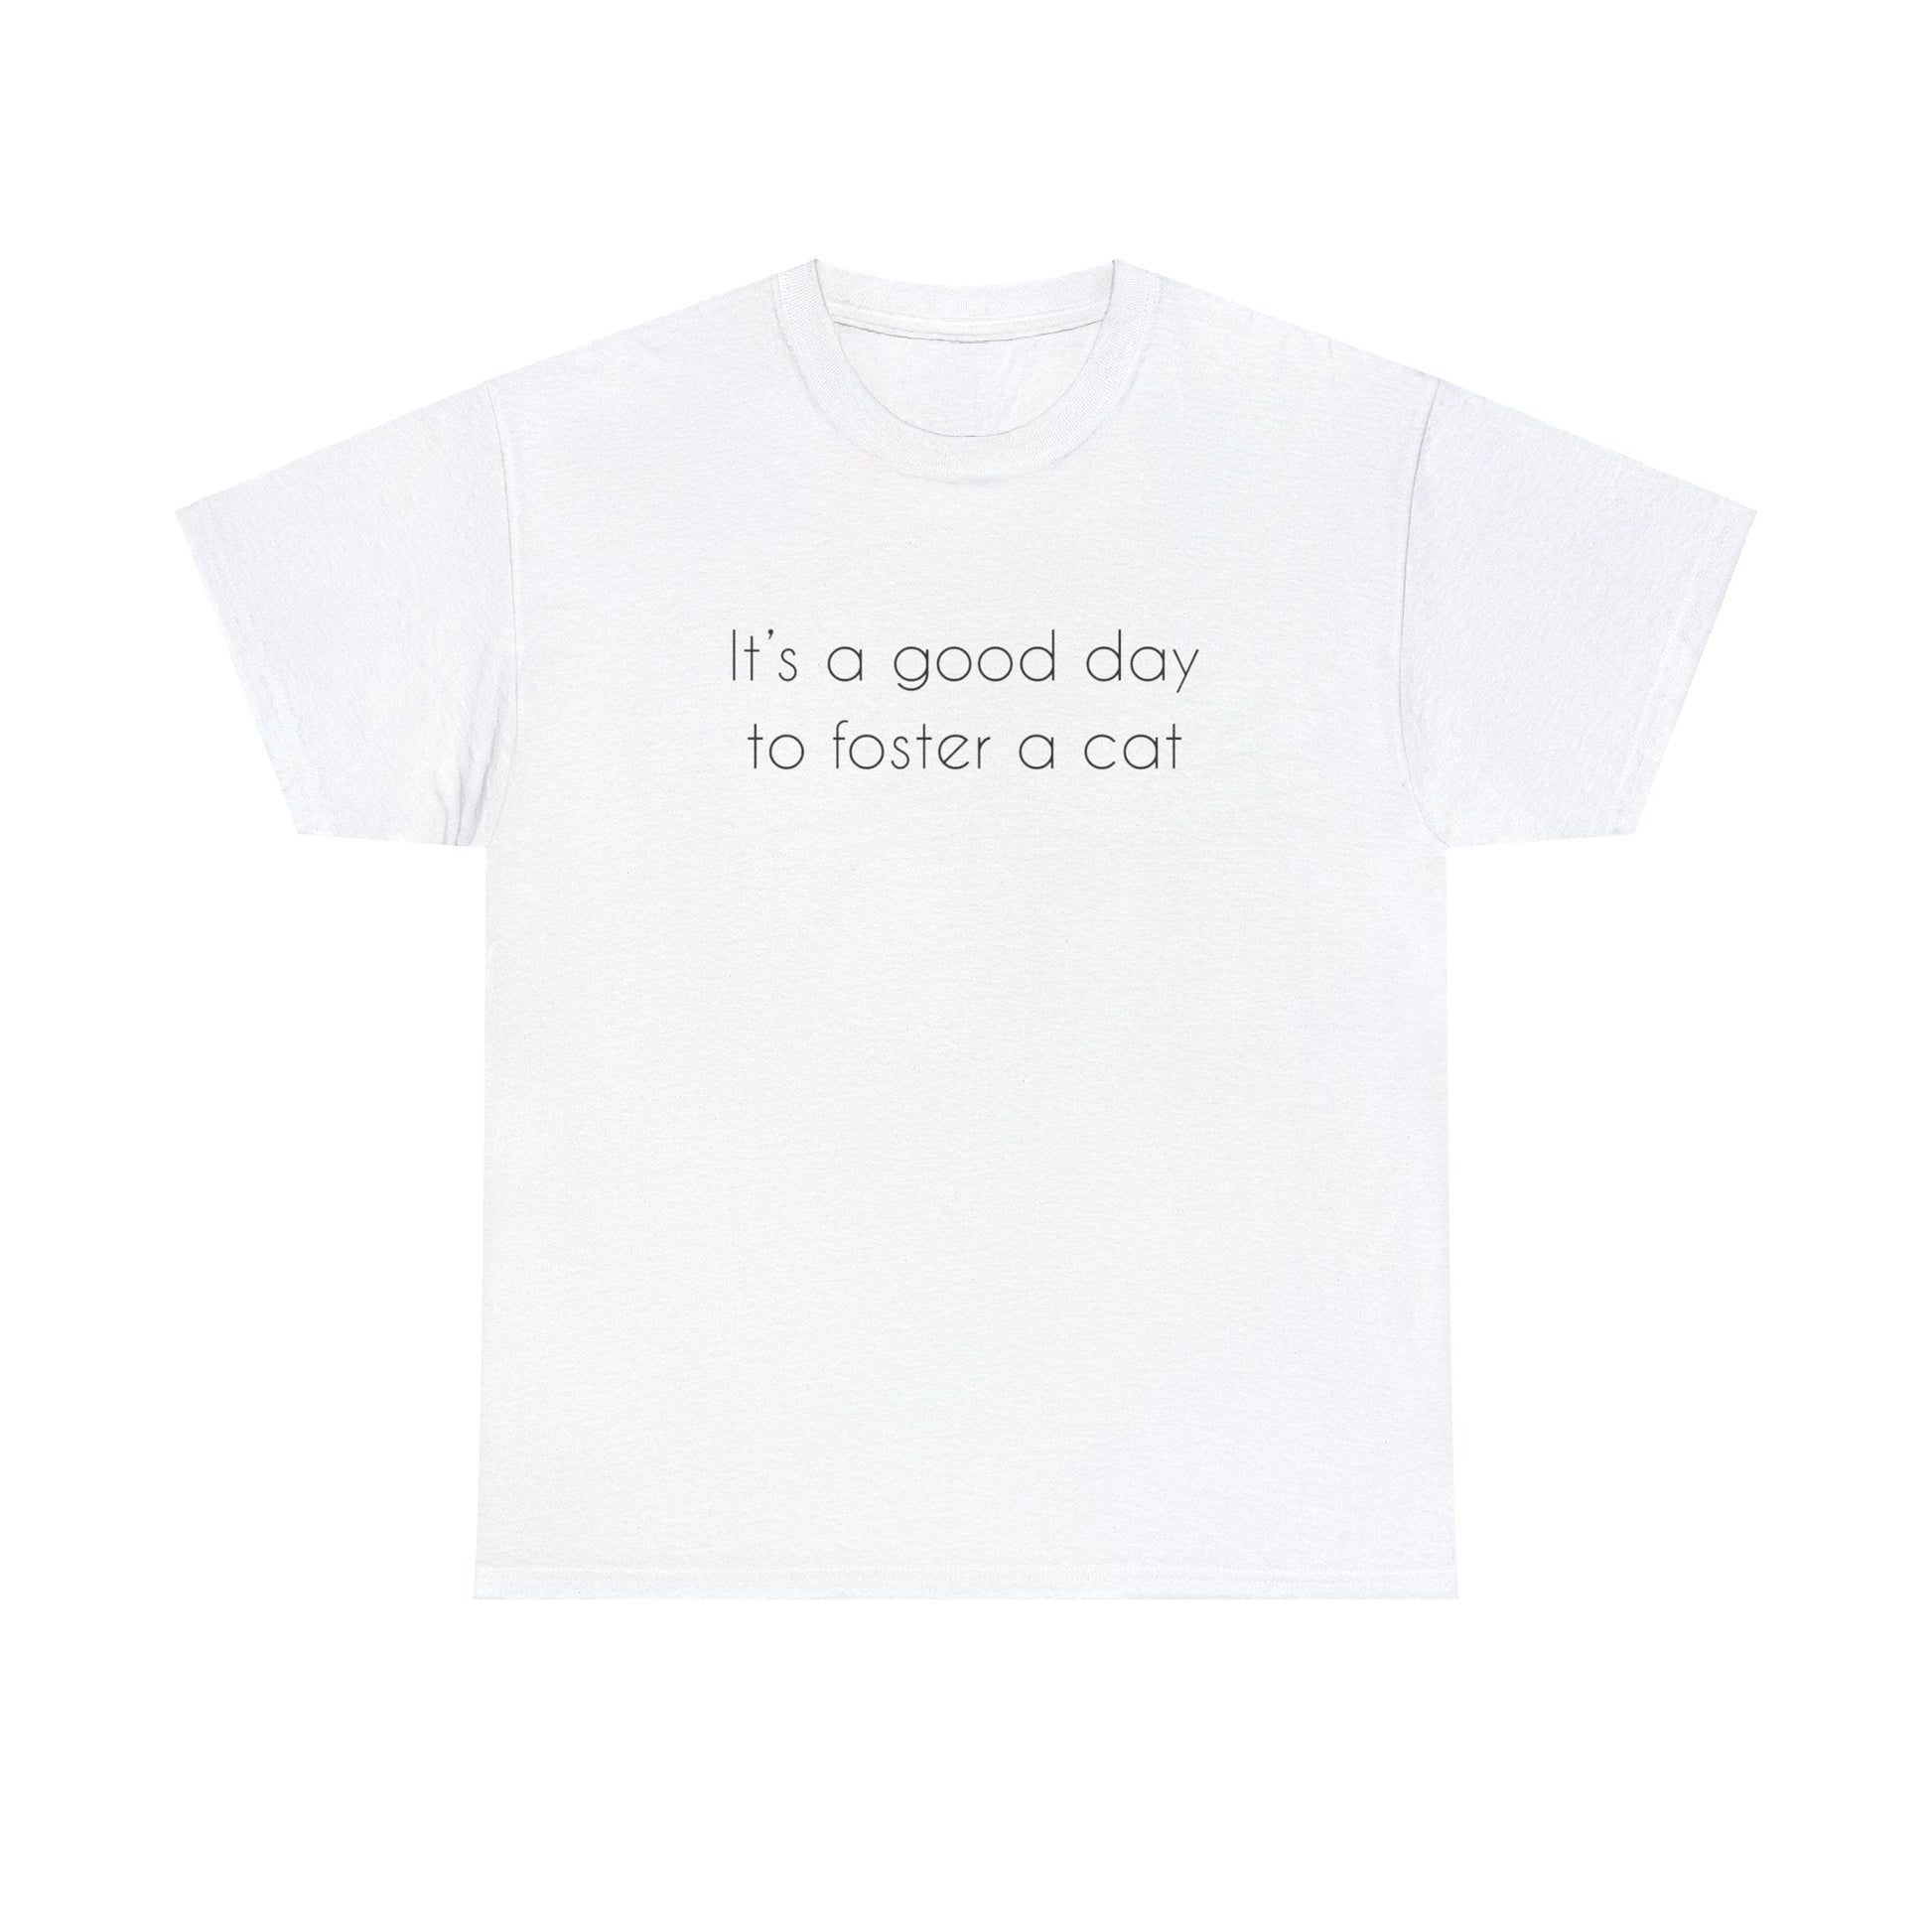 It's A Good Day To Foster A Cat | Text Tees - Detezi Designs-17299460086878759251